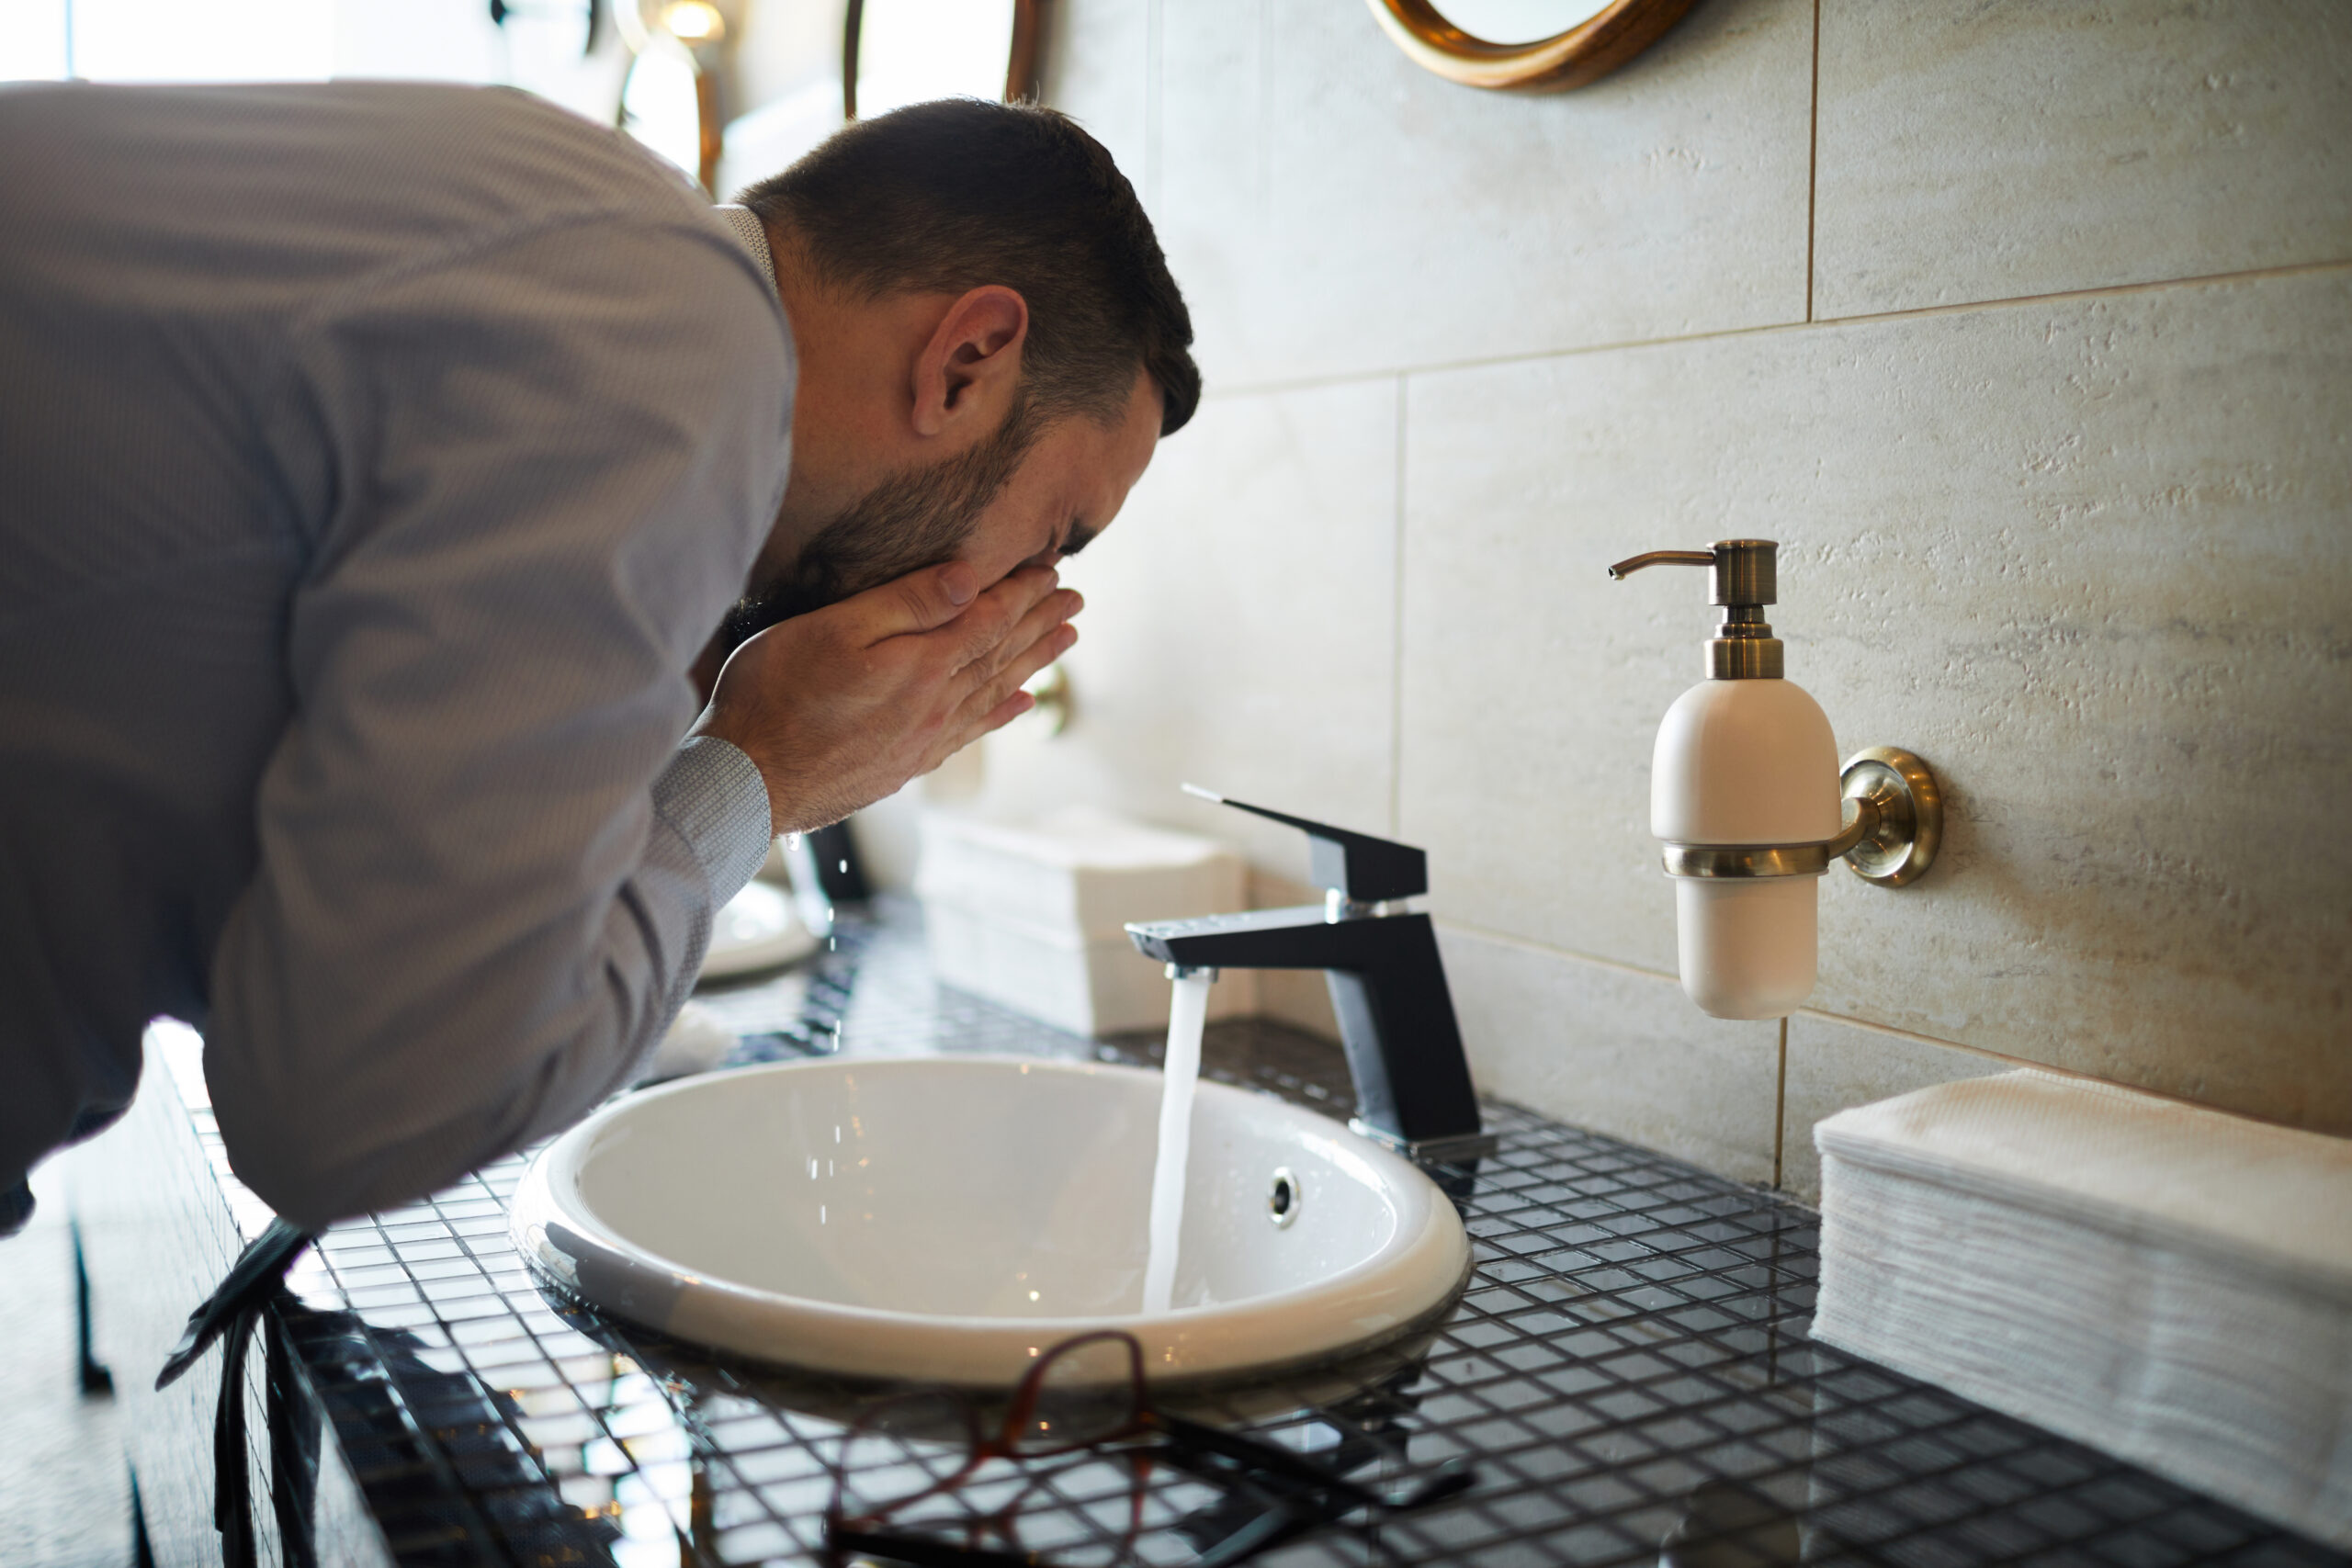 Man washing his face over sink